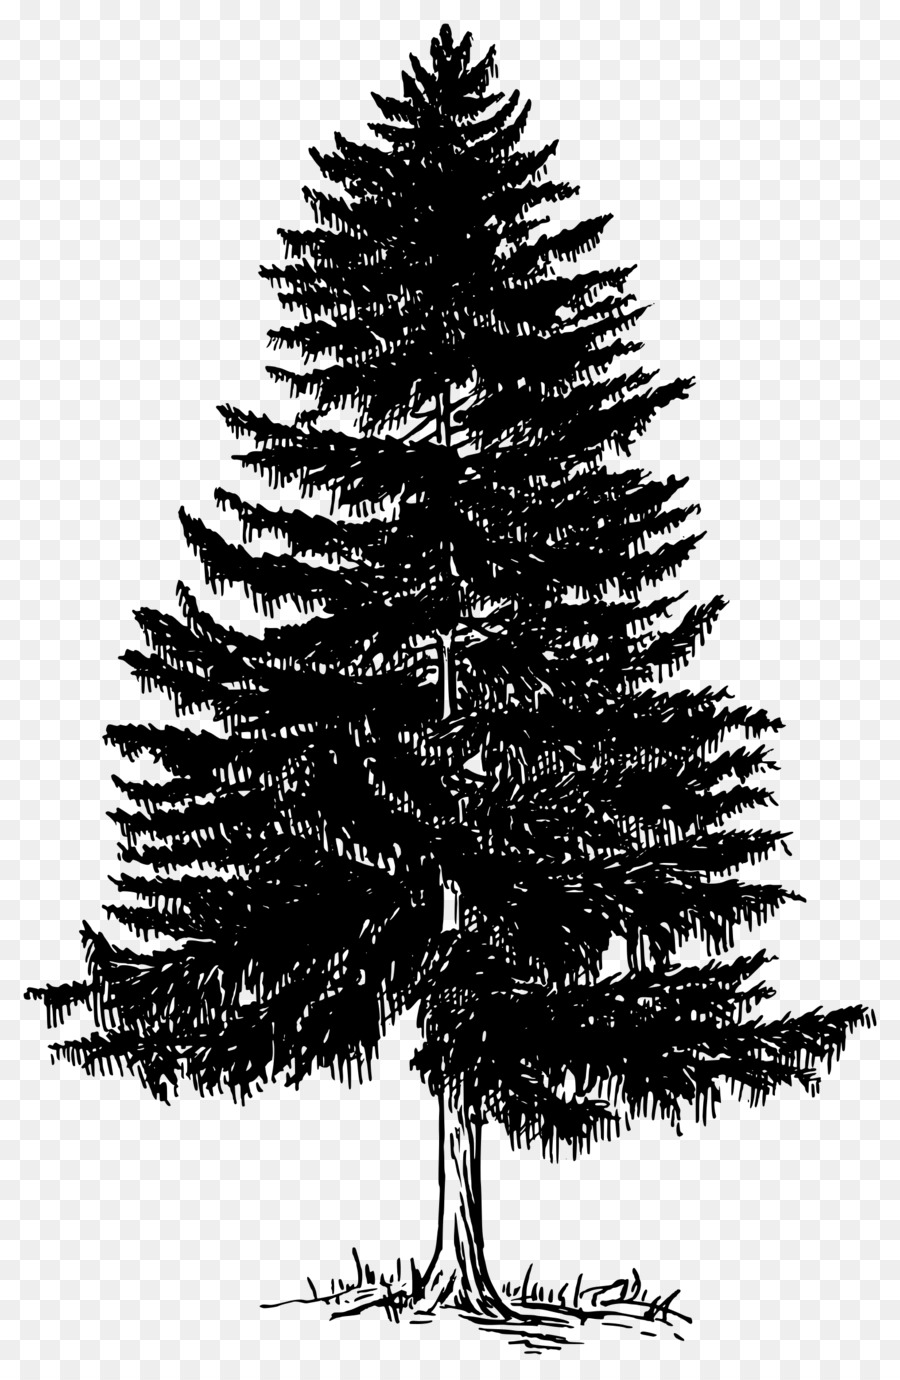 Bus stop Clip art - evergreen trees png download - 1568*2400 - Free Transparent Bus png Download.